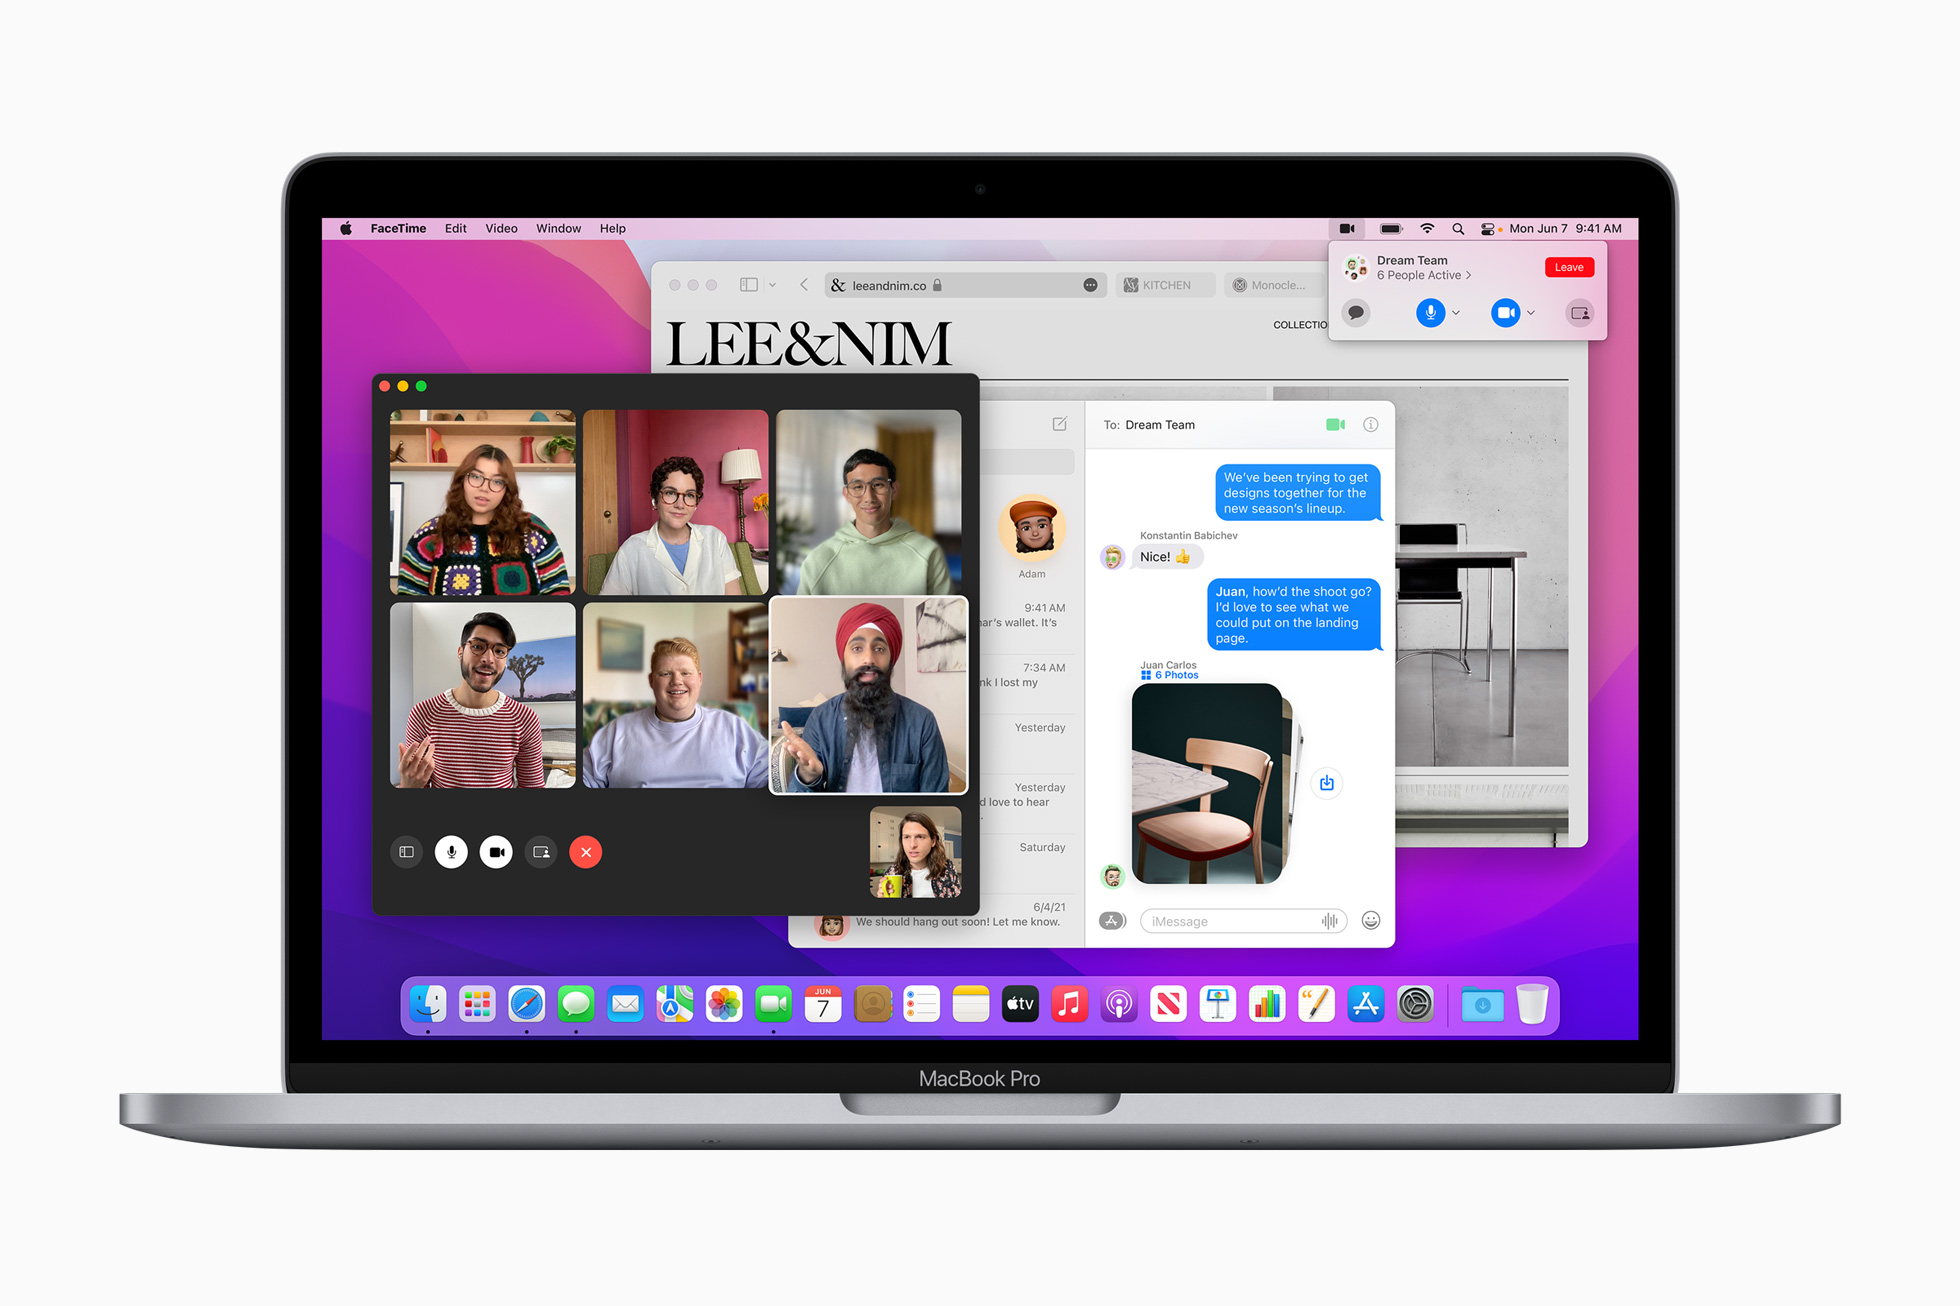 facetime for free on mac